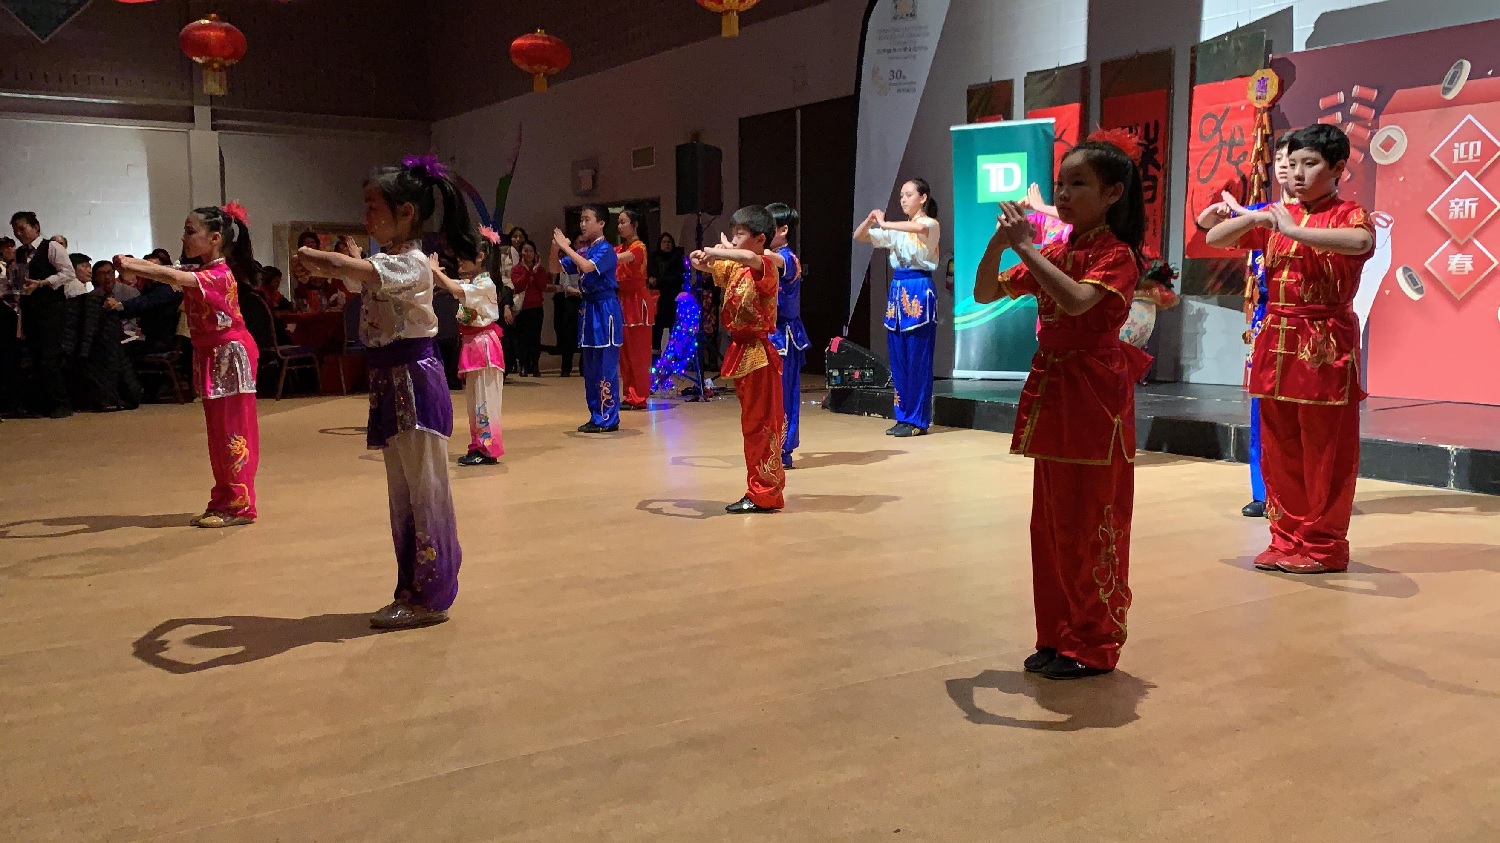 wayland-li-wushu-year-of-the-pig-dinner-chinese-cultural-centre-2019-02.jpg